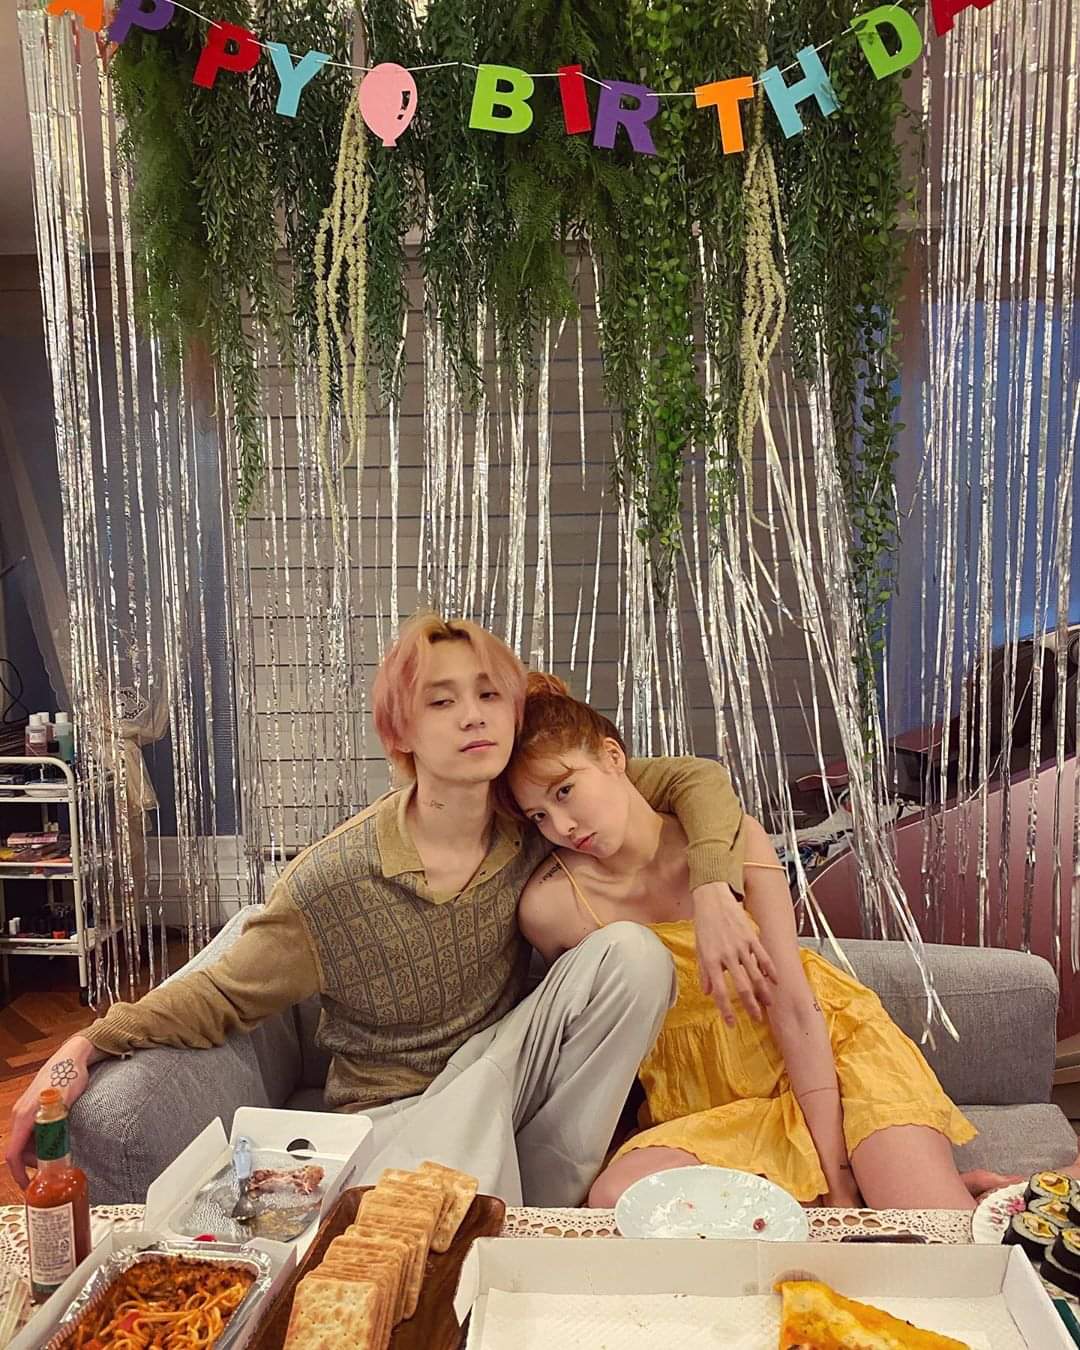 hyun-a-shares-romantic-moments-in-her-soon-birthday-party-with-e'dawn-6